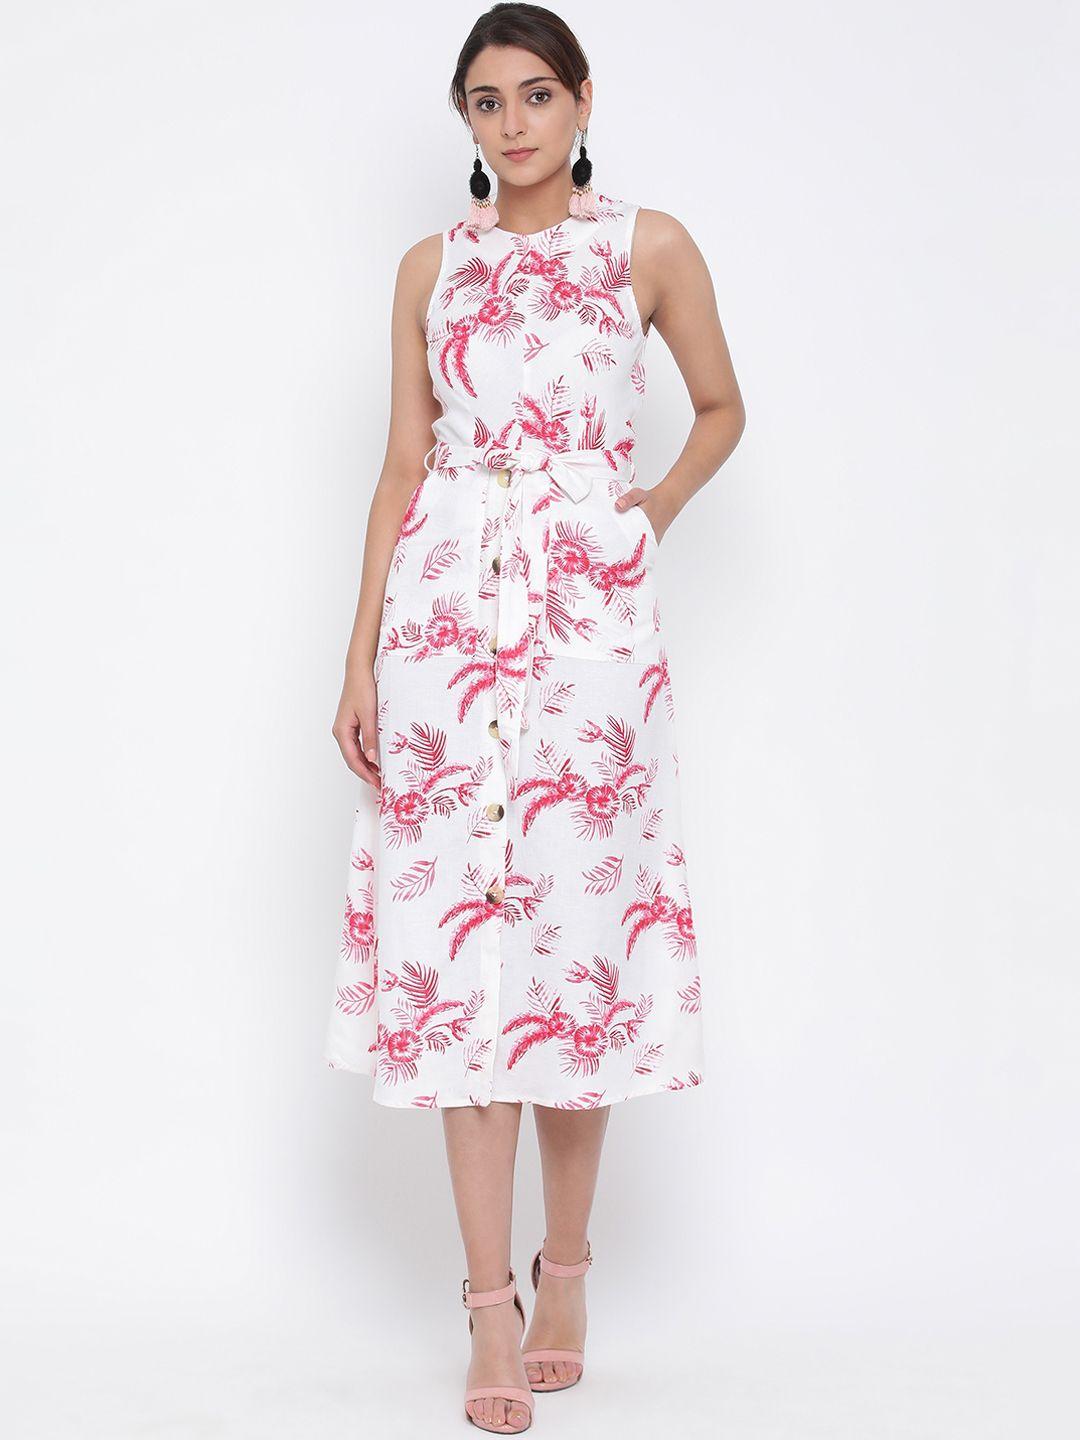 oxolloxo-women-white-&-pink-printed-fit-and-flare-dress